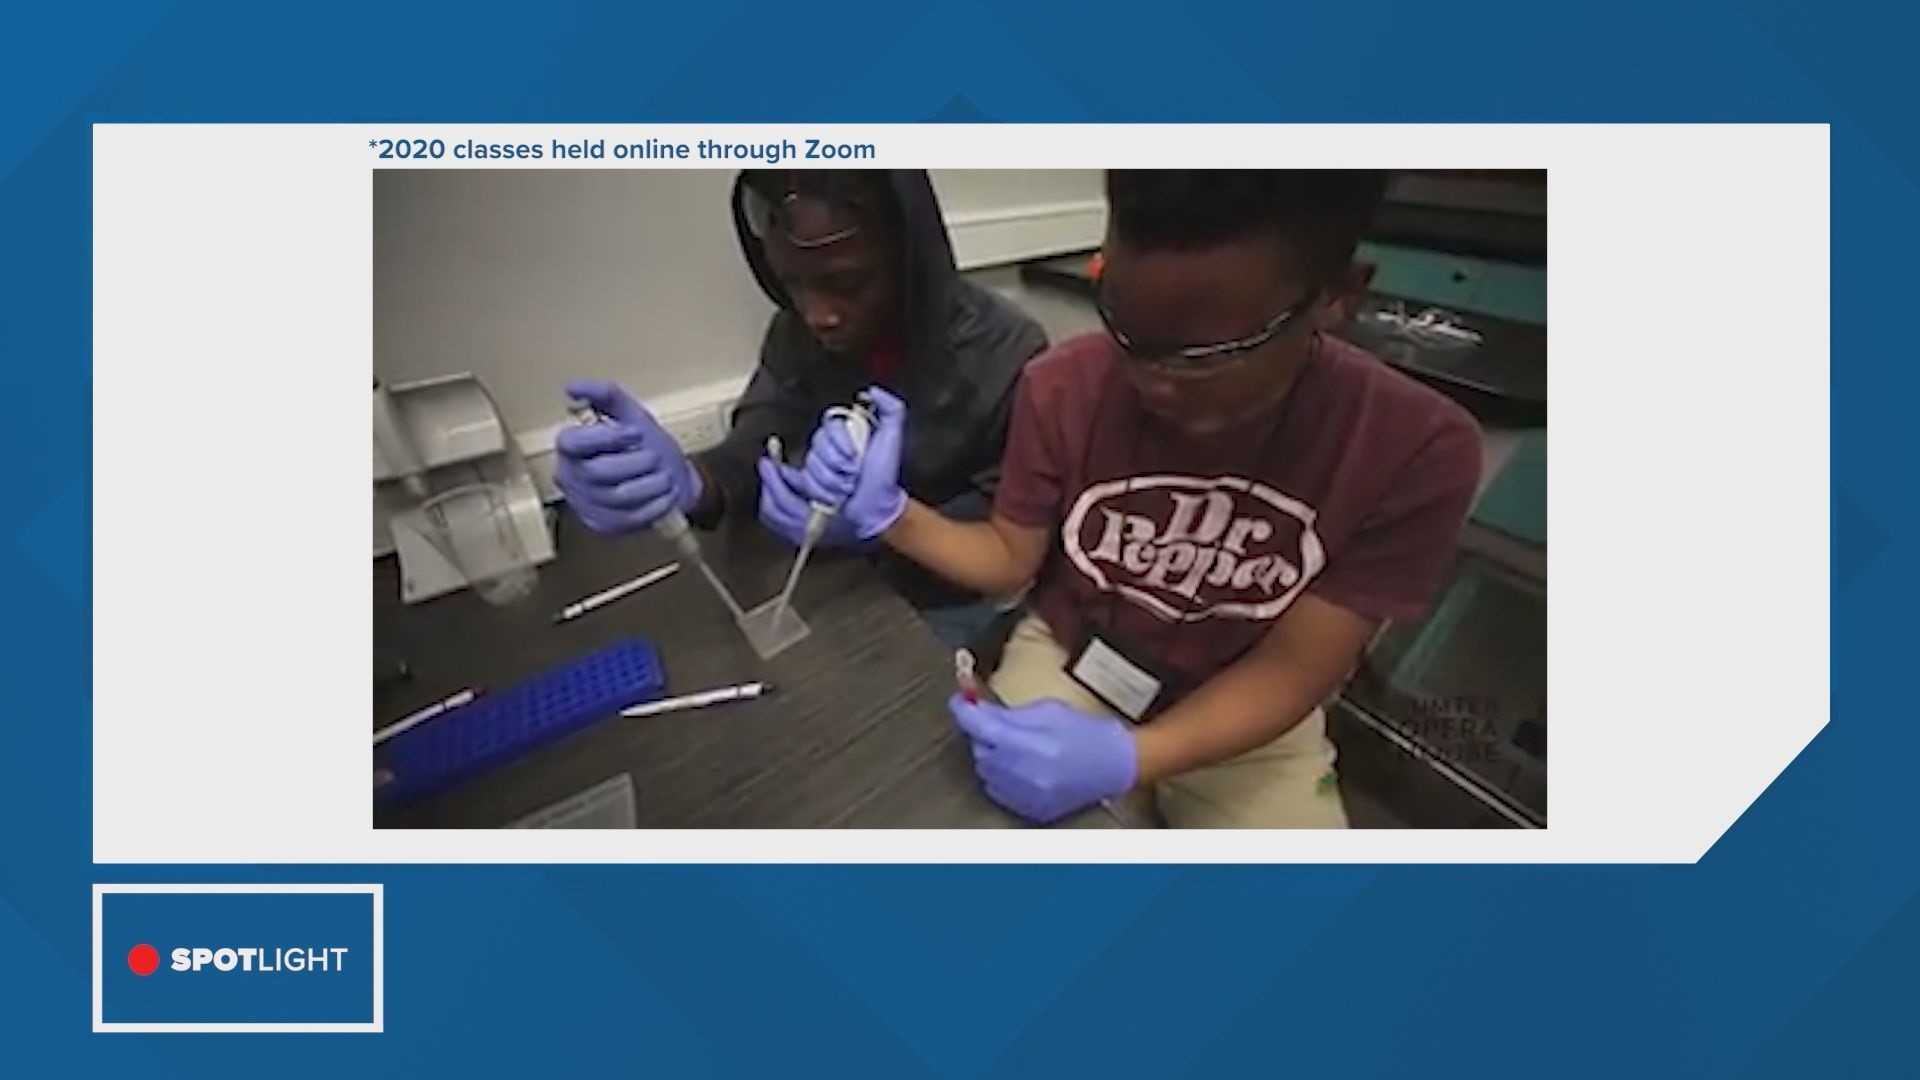 USC Sumter talks about their summer science camp taking place.